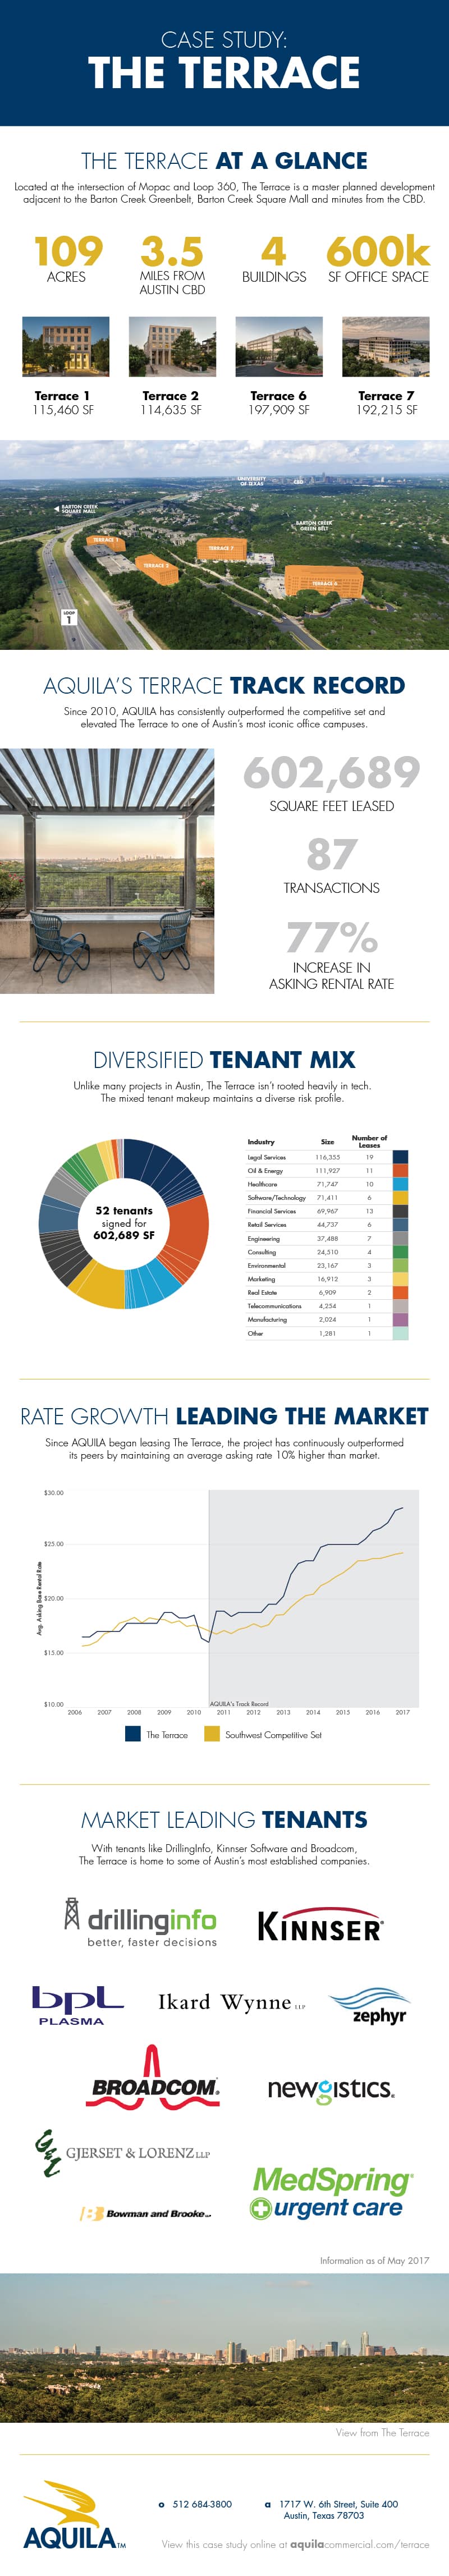 The Terrace Case Study Infographic